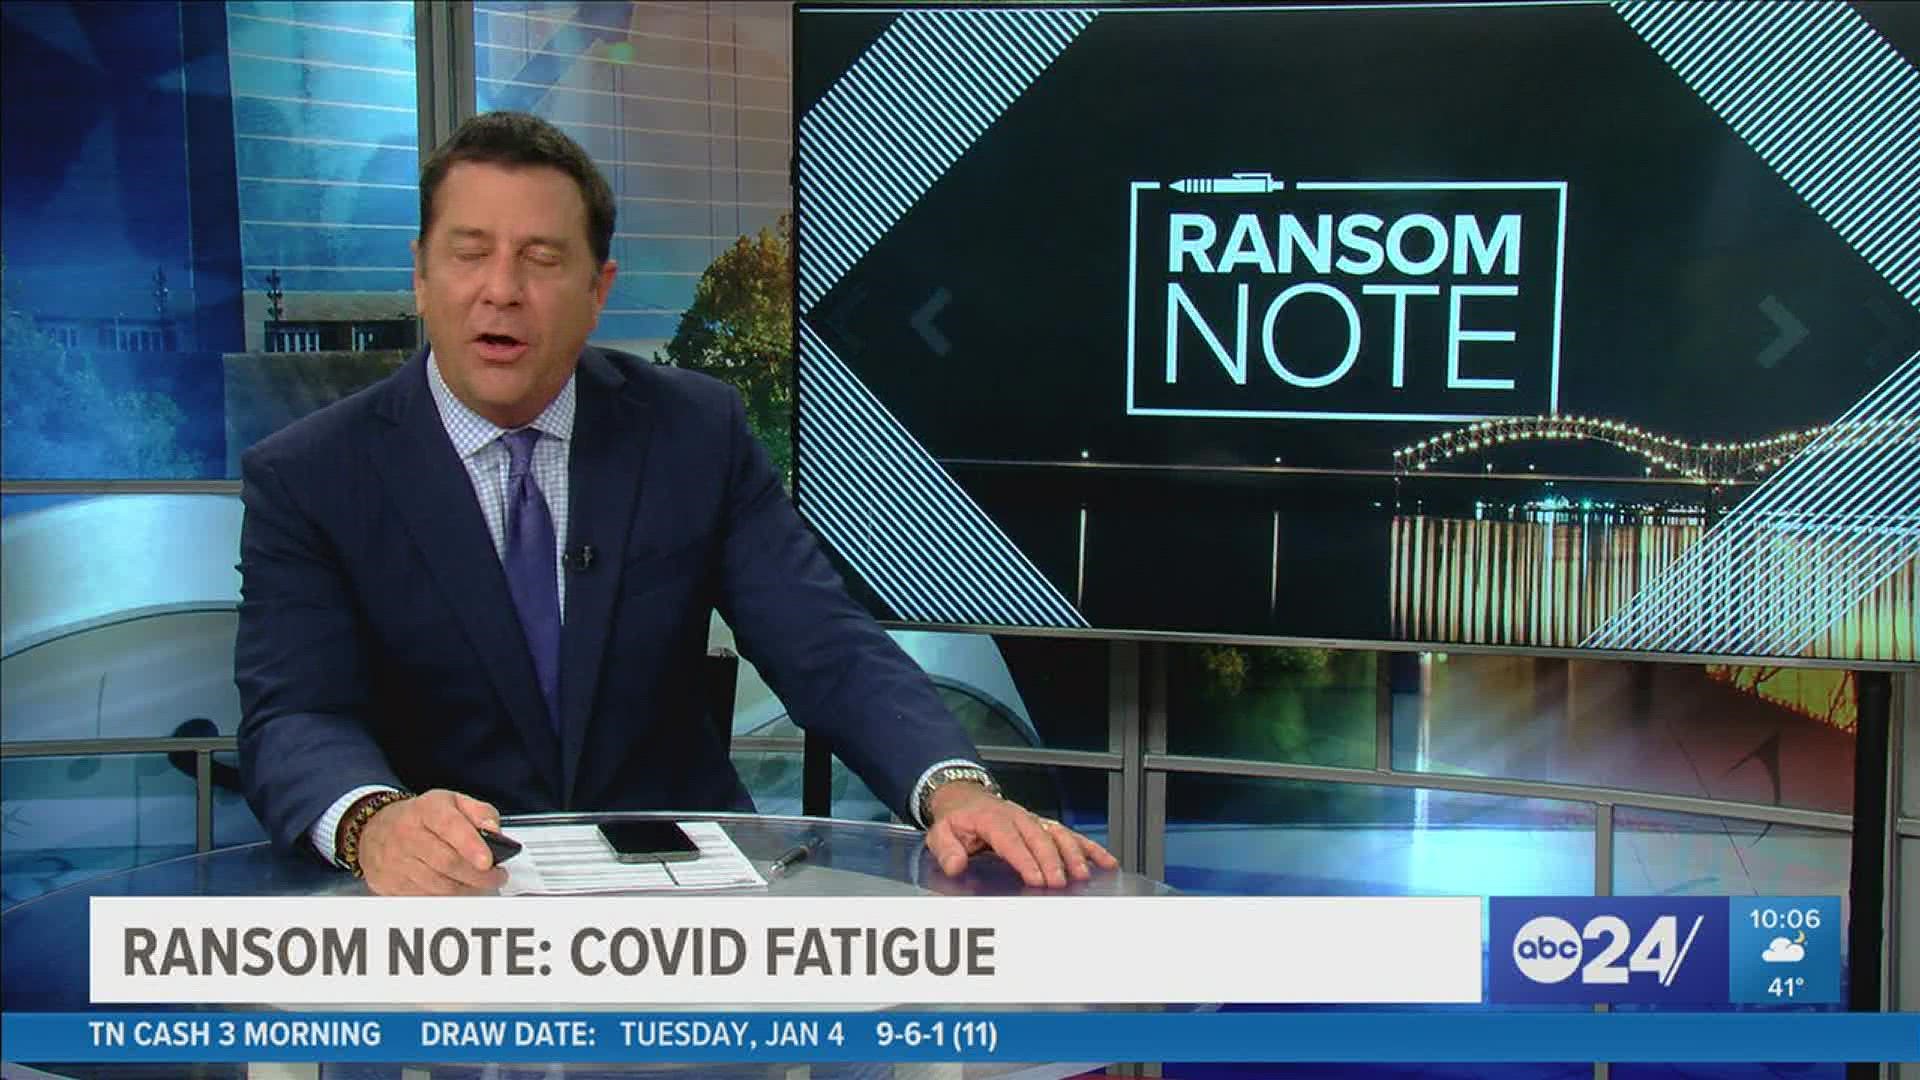 ABC24 Anchor Richard Ransom shares in his Ransom Note how we're dealing with COVID fatigue.